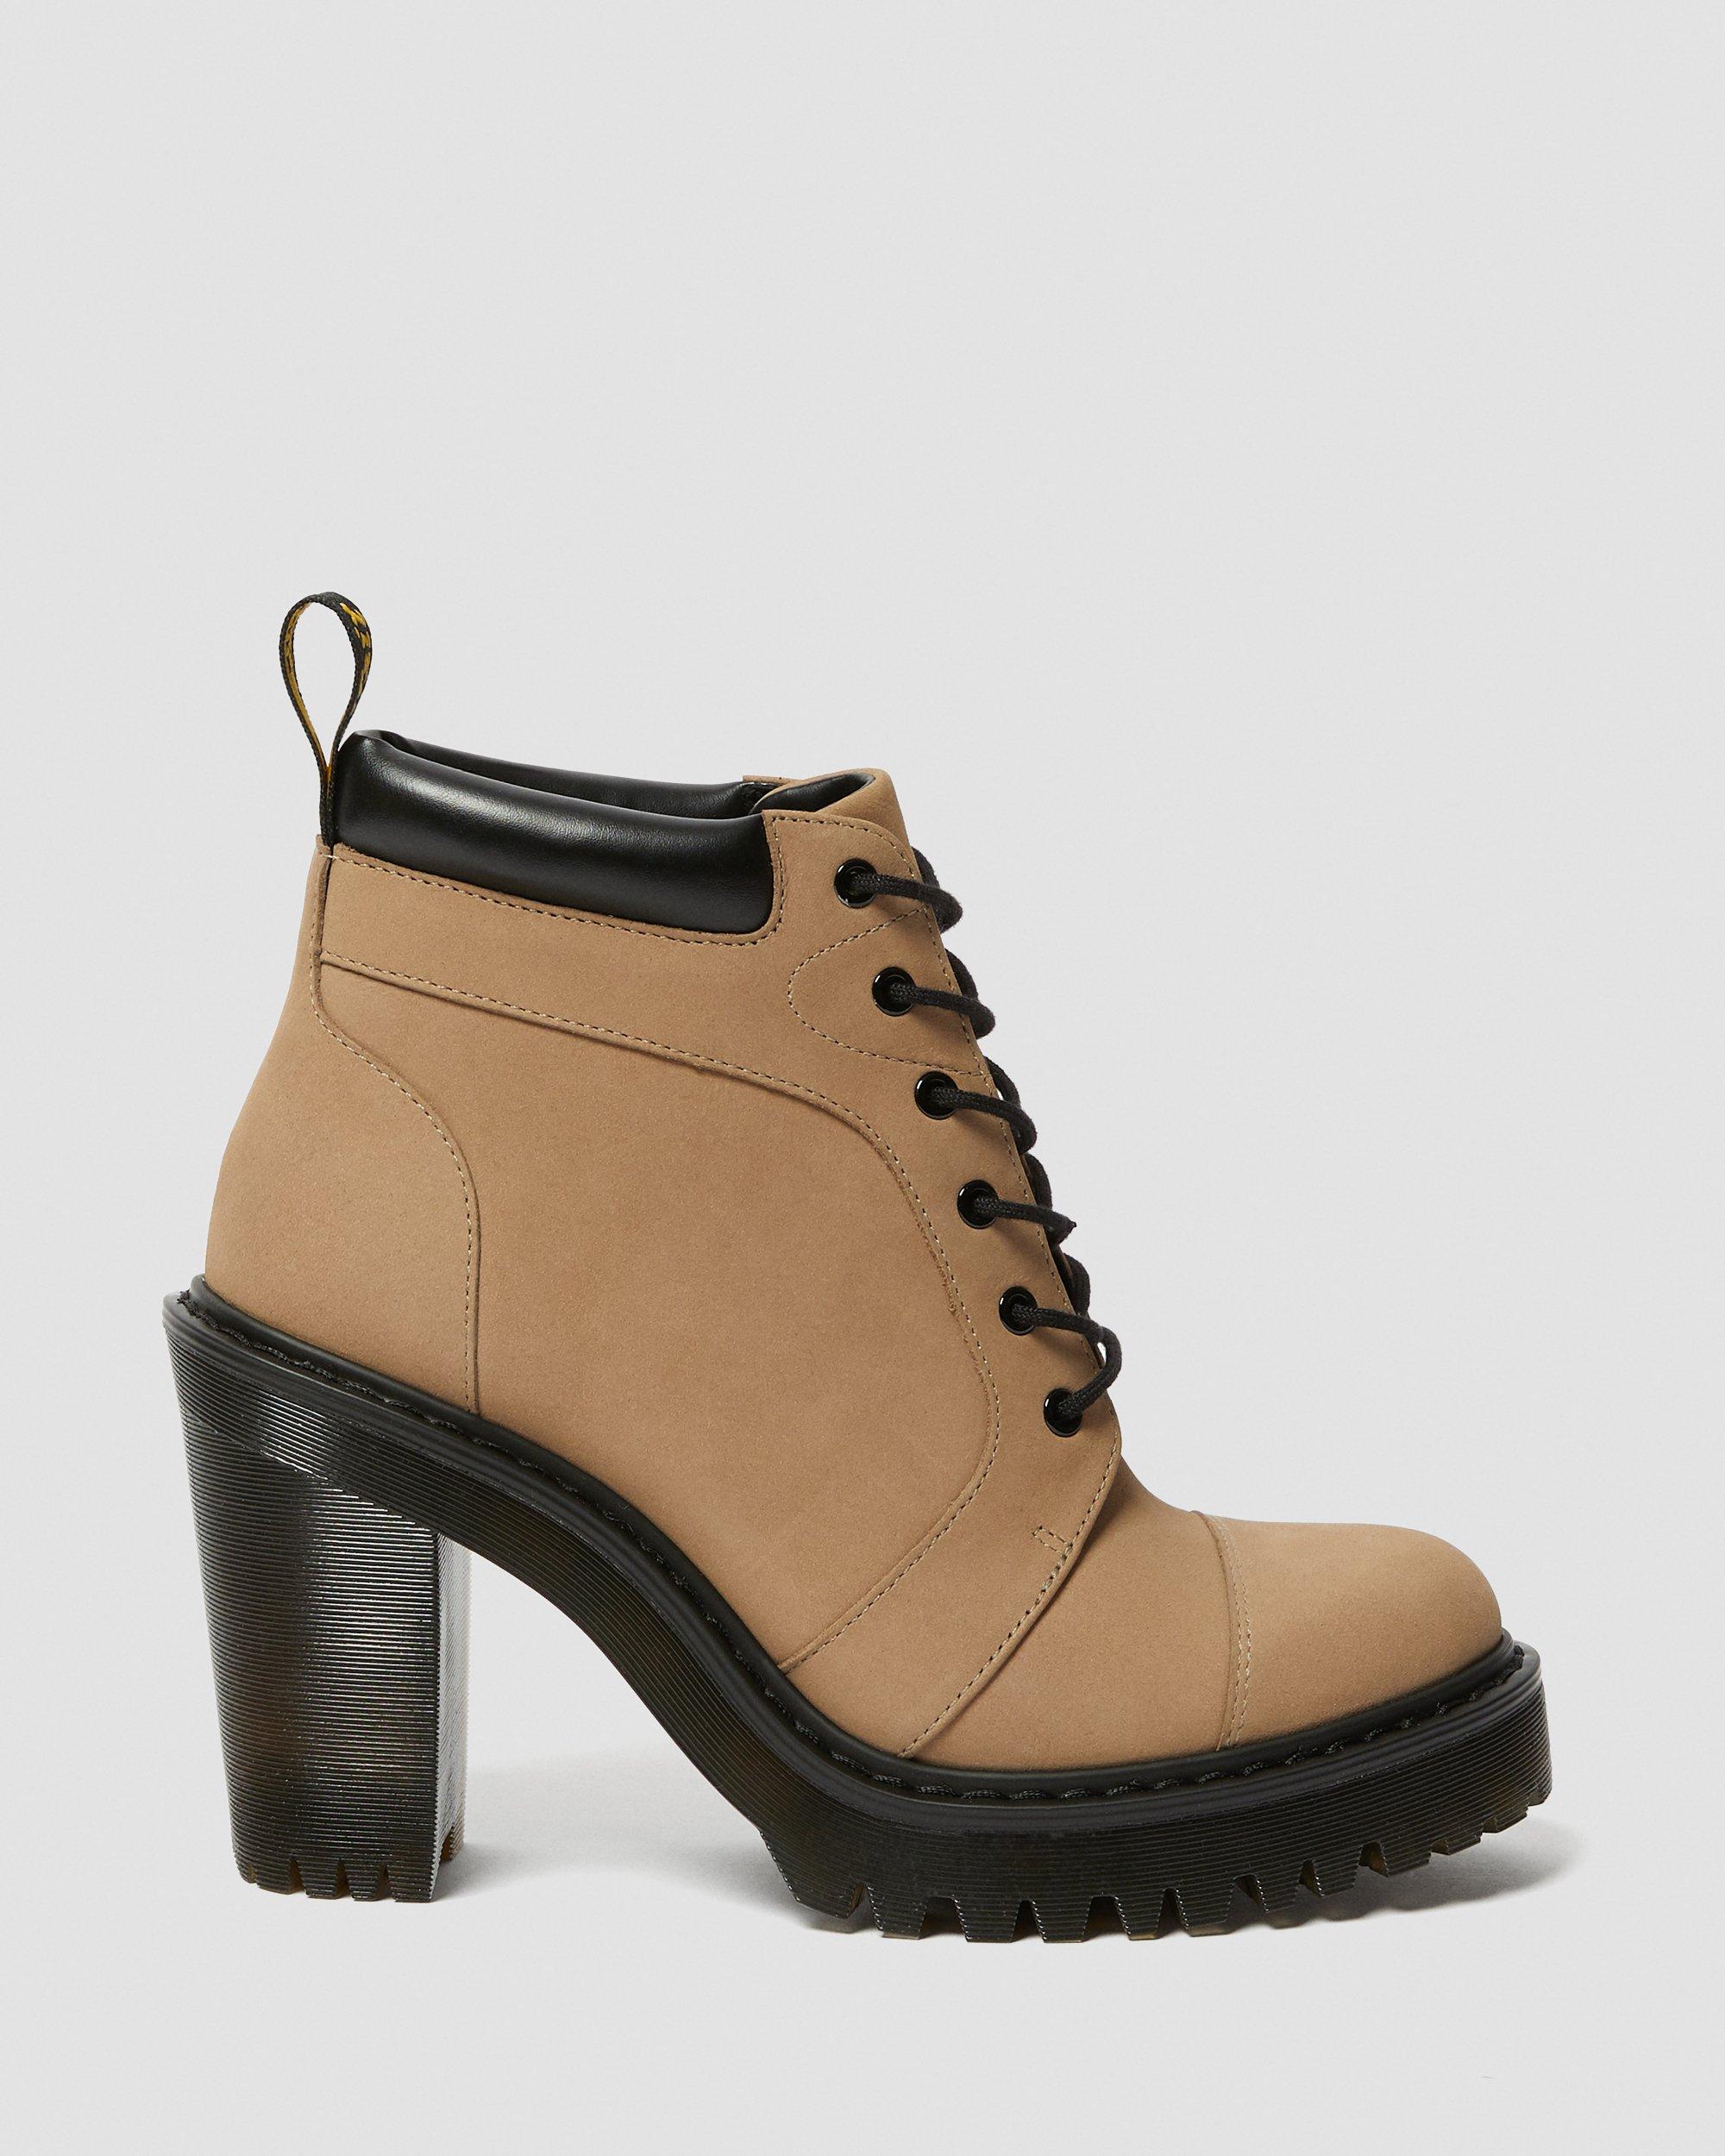 Averil Women's Suede Heeled Ankle Boots | Dr. Martens